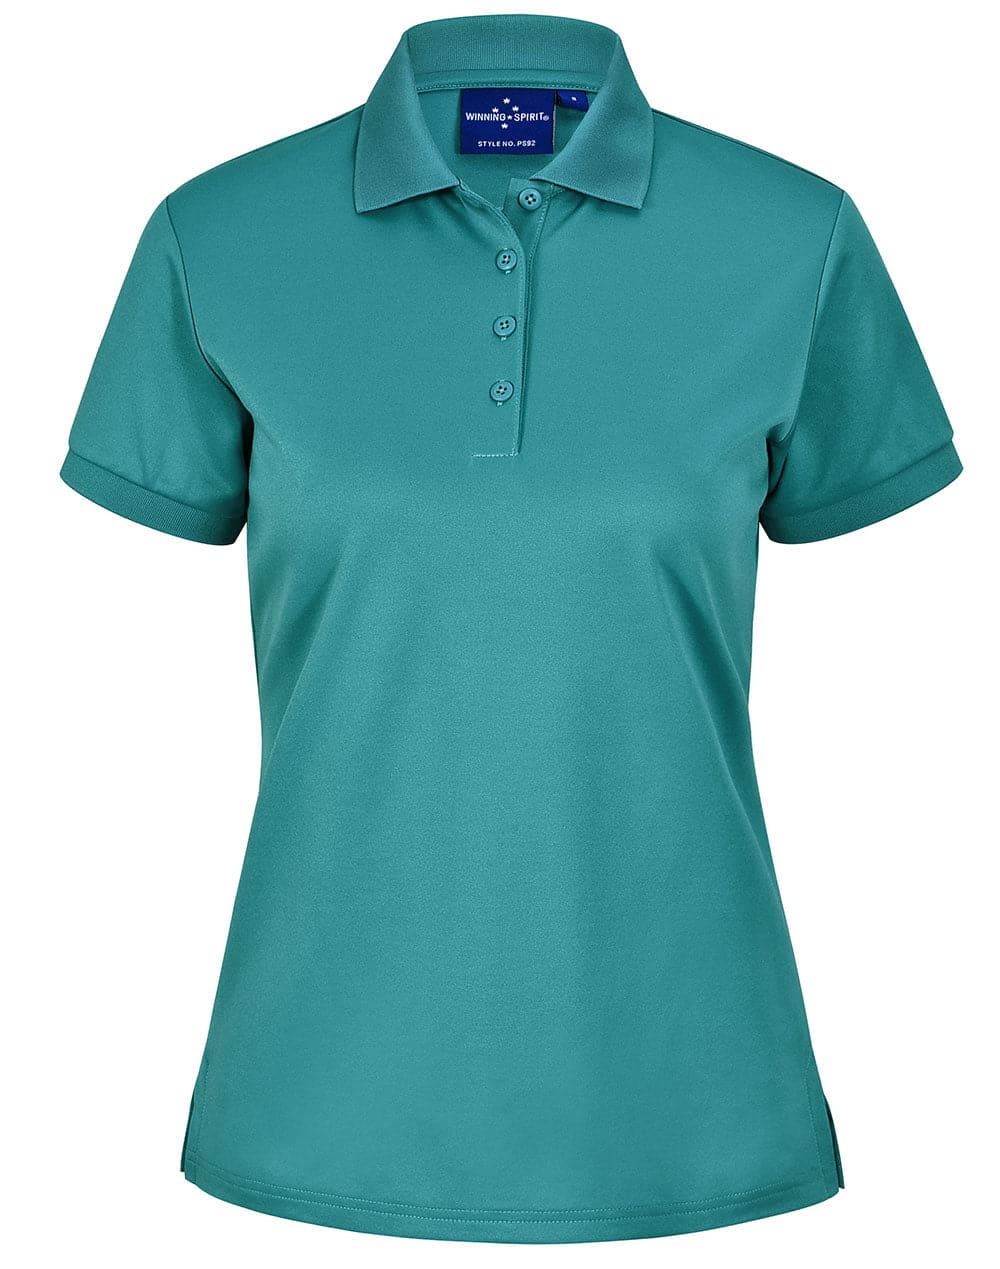 Winning Spirit Ladie's Sustainable Poly/Cotton Corporate Polo PS92 - Simply Scrubs Australia